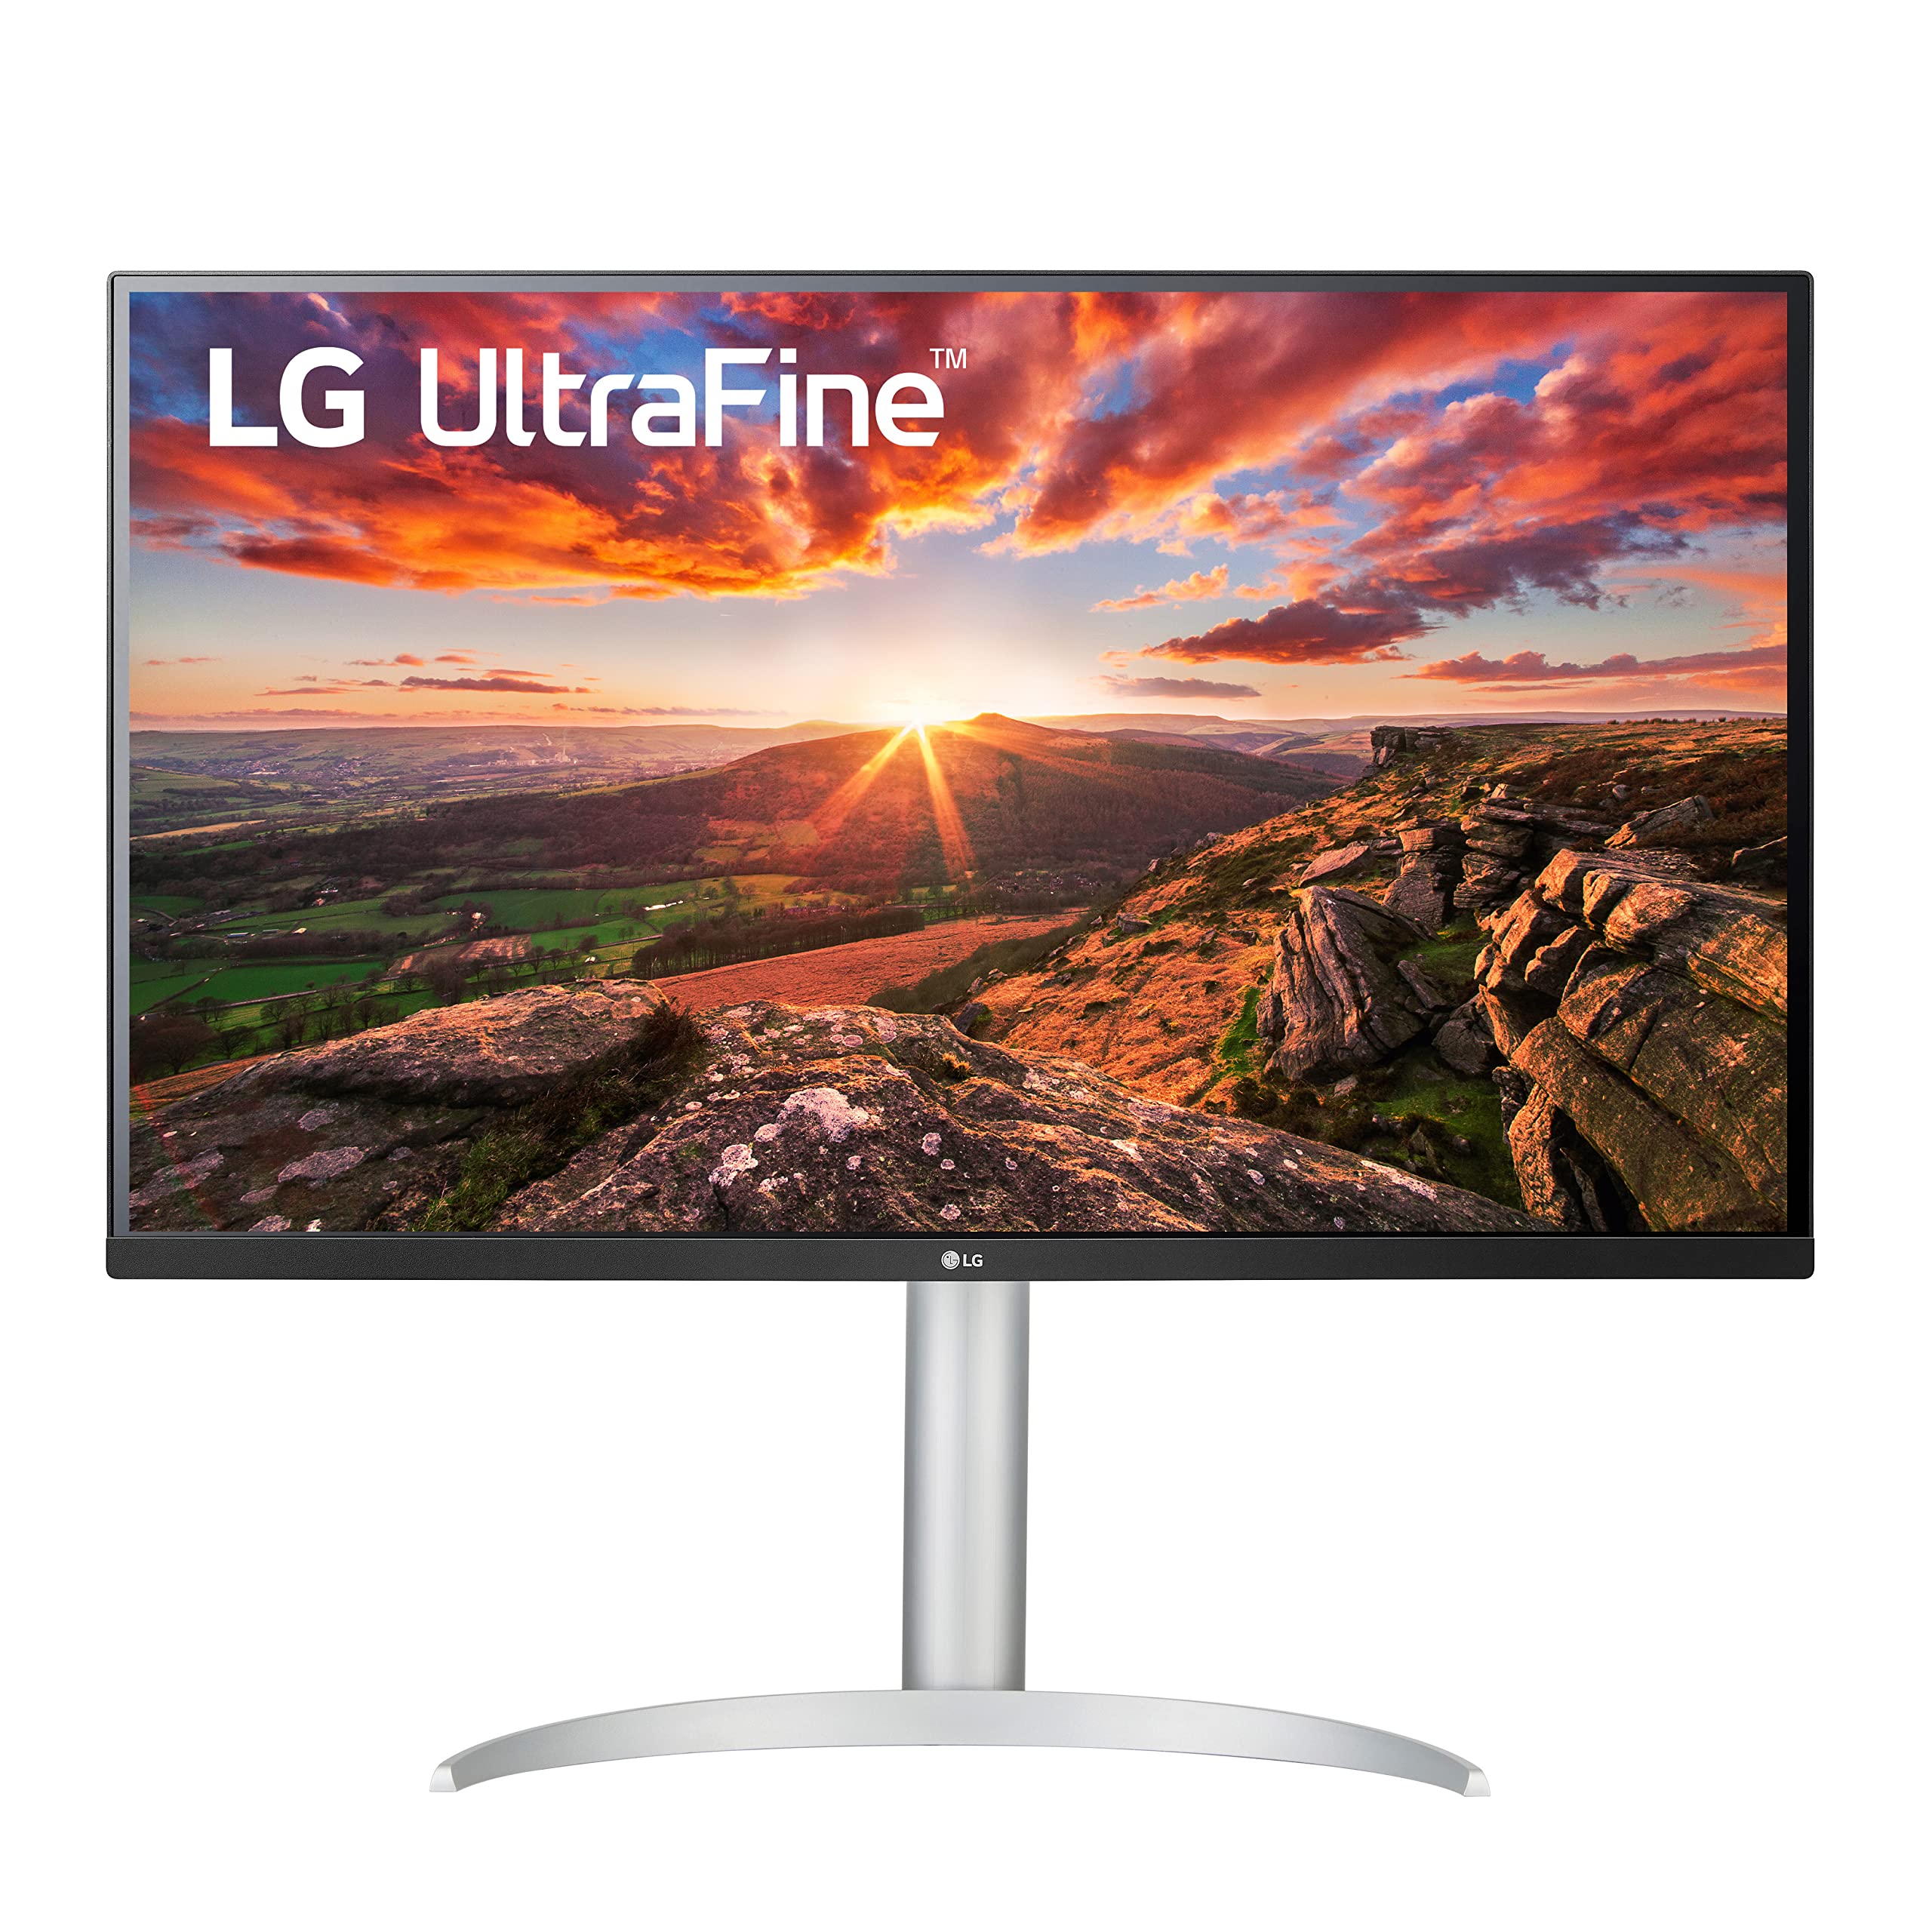 LG 32UP83A-W 31.5 Inch Class 4K IPS Monitor $399.99 at Amazon